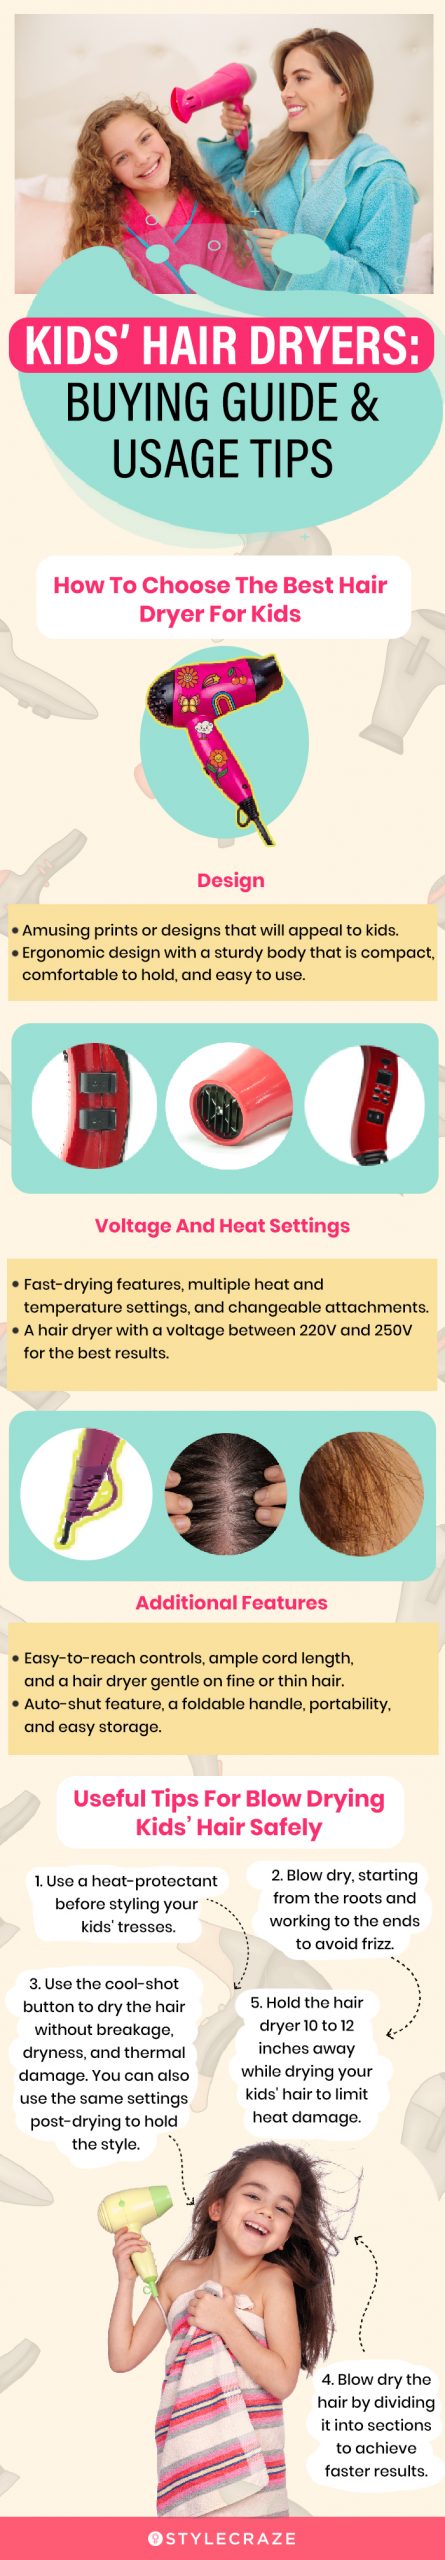 Kids’ Hair Dryers: Buying Guide & Usage Tips (infographic)